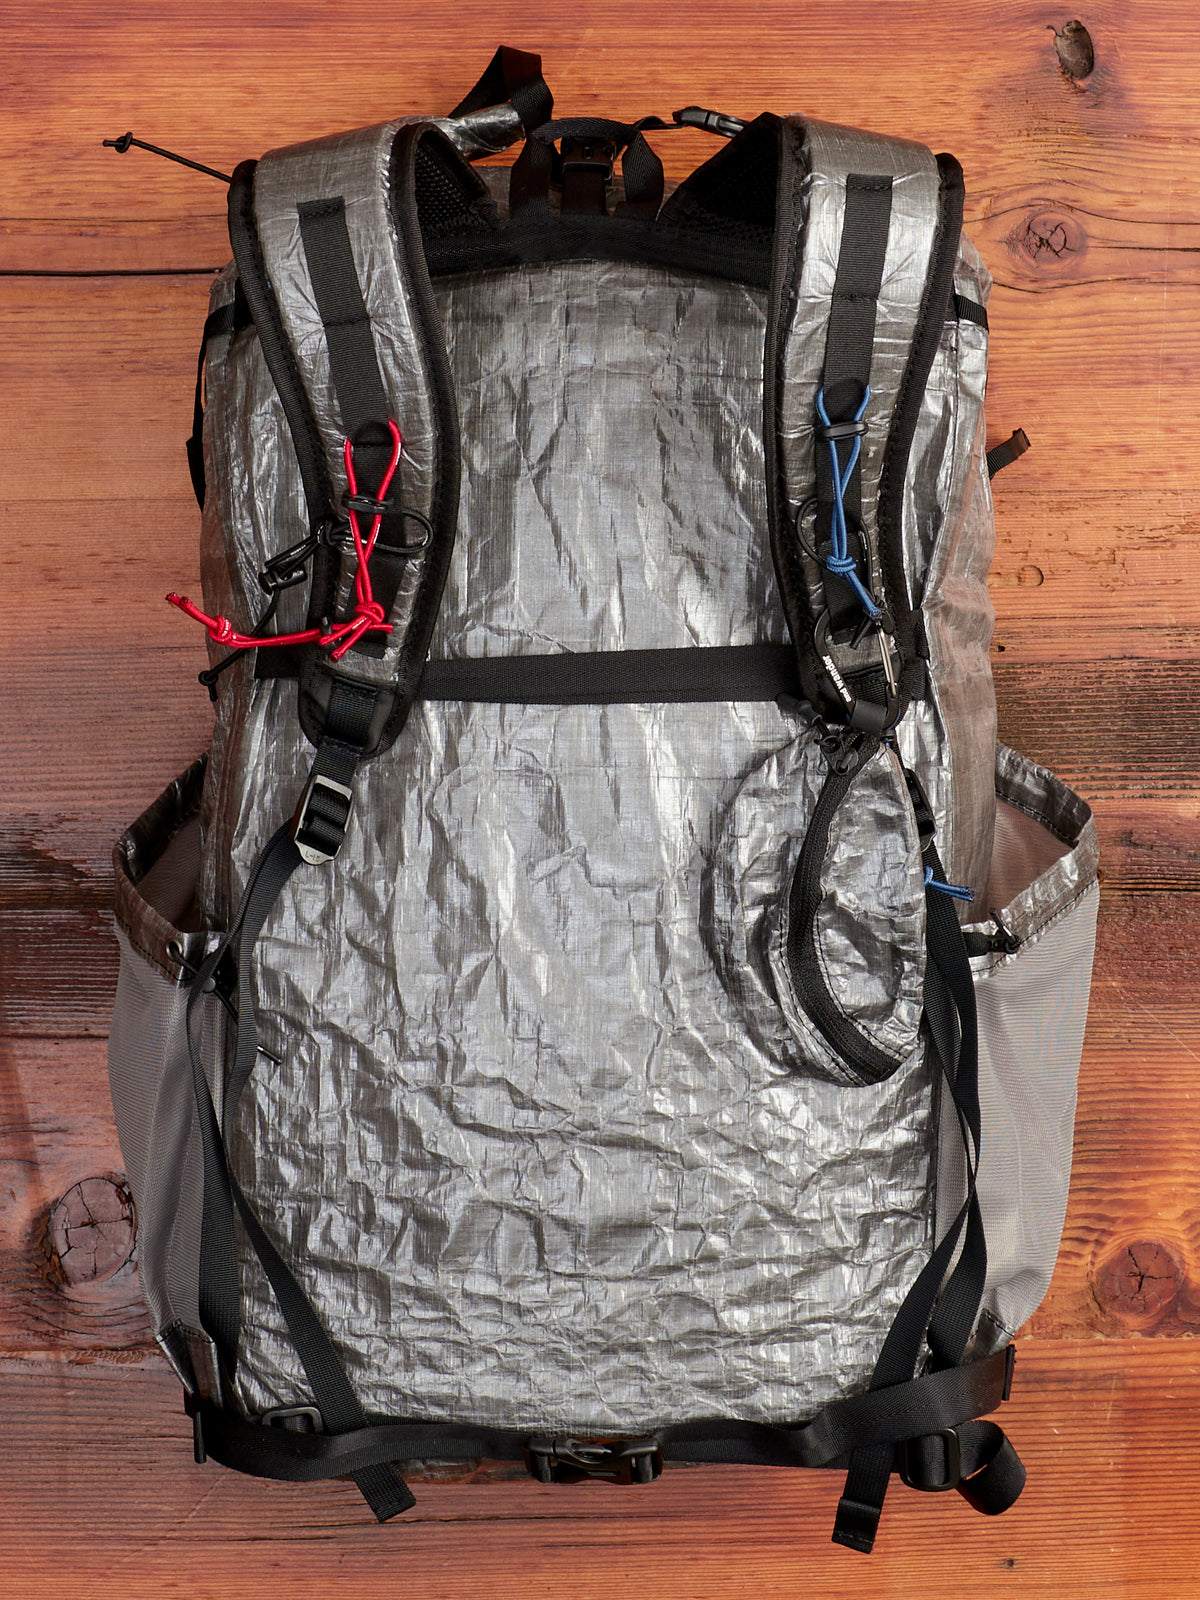 25L Dyneema Backpack in Charcoal and Wander Explore our selection